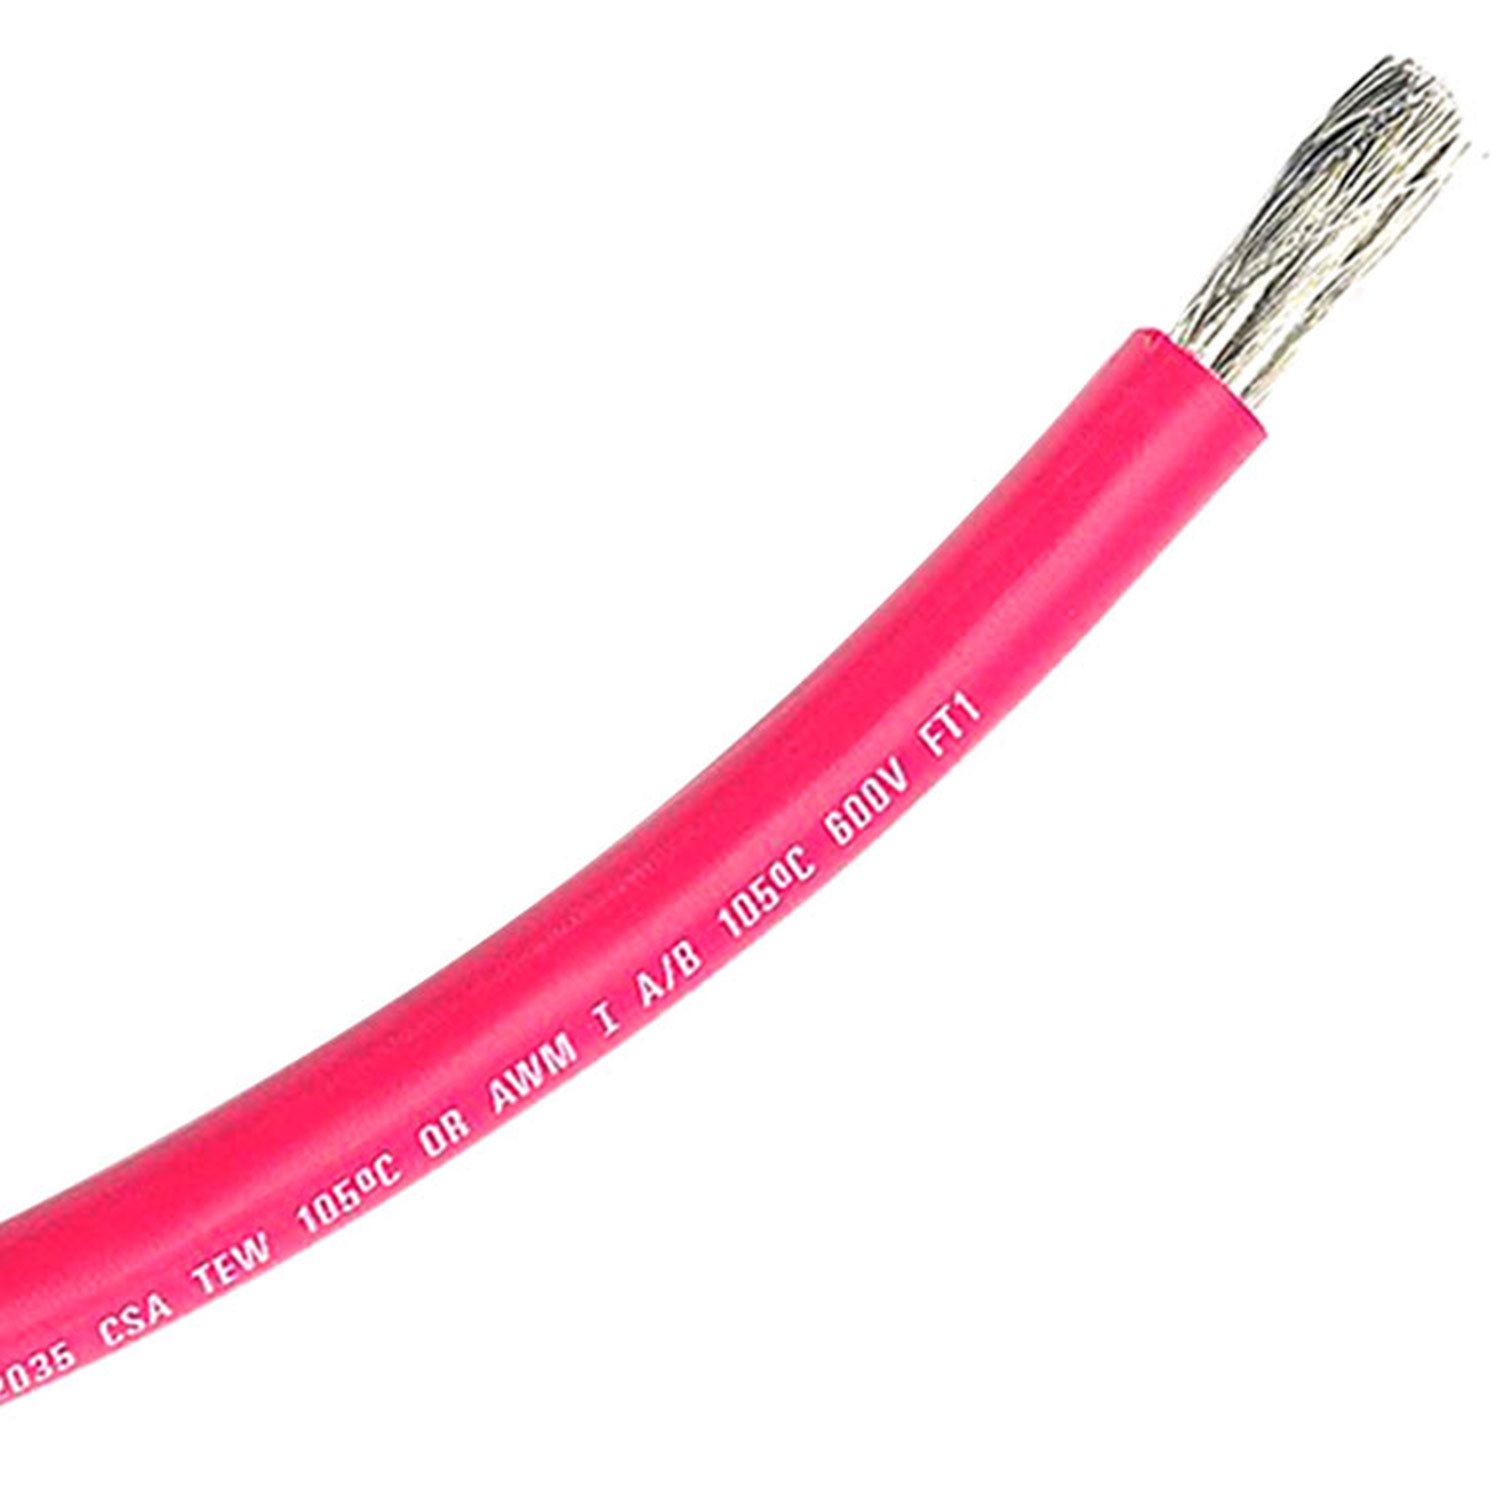 ANCOR 4 AWG Battery Cable, Sold per Foot up to 100', Red